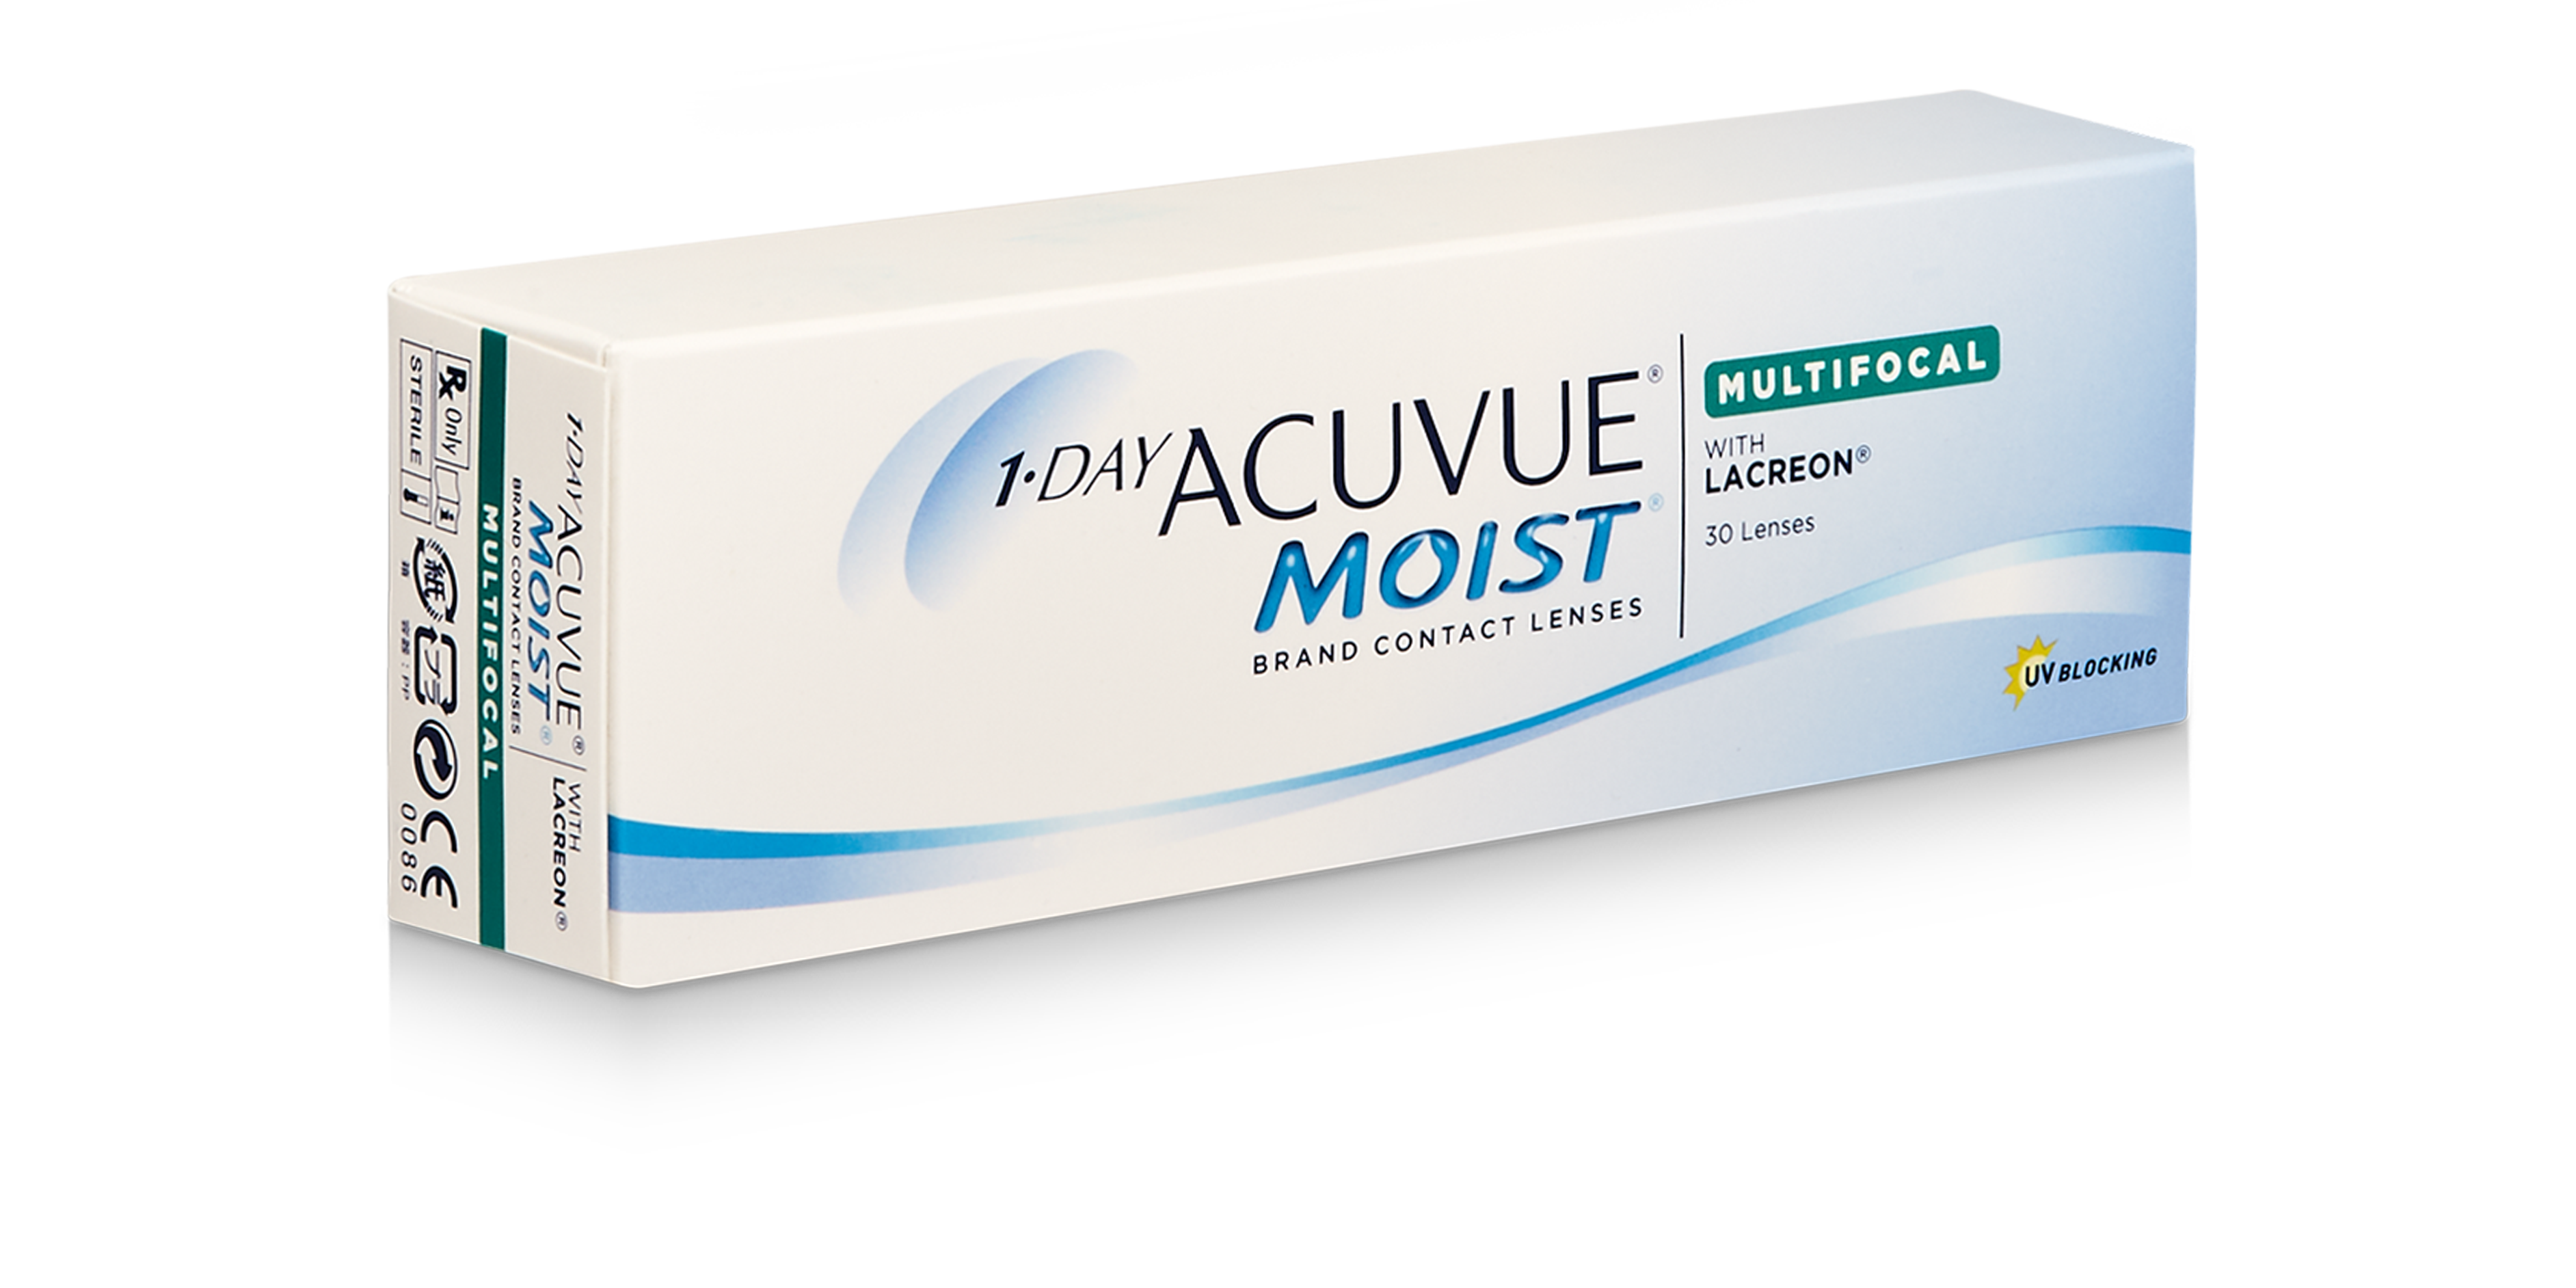 1-DAY ACUVUE® MOIST MULTIFOCAL, 30 Pack